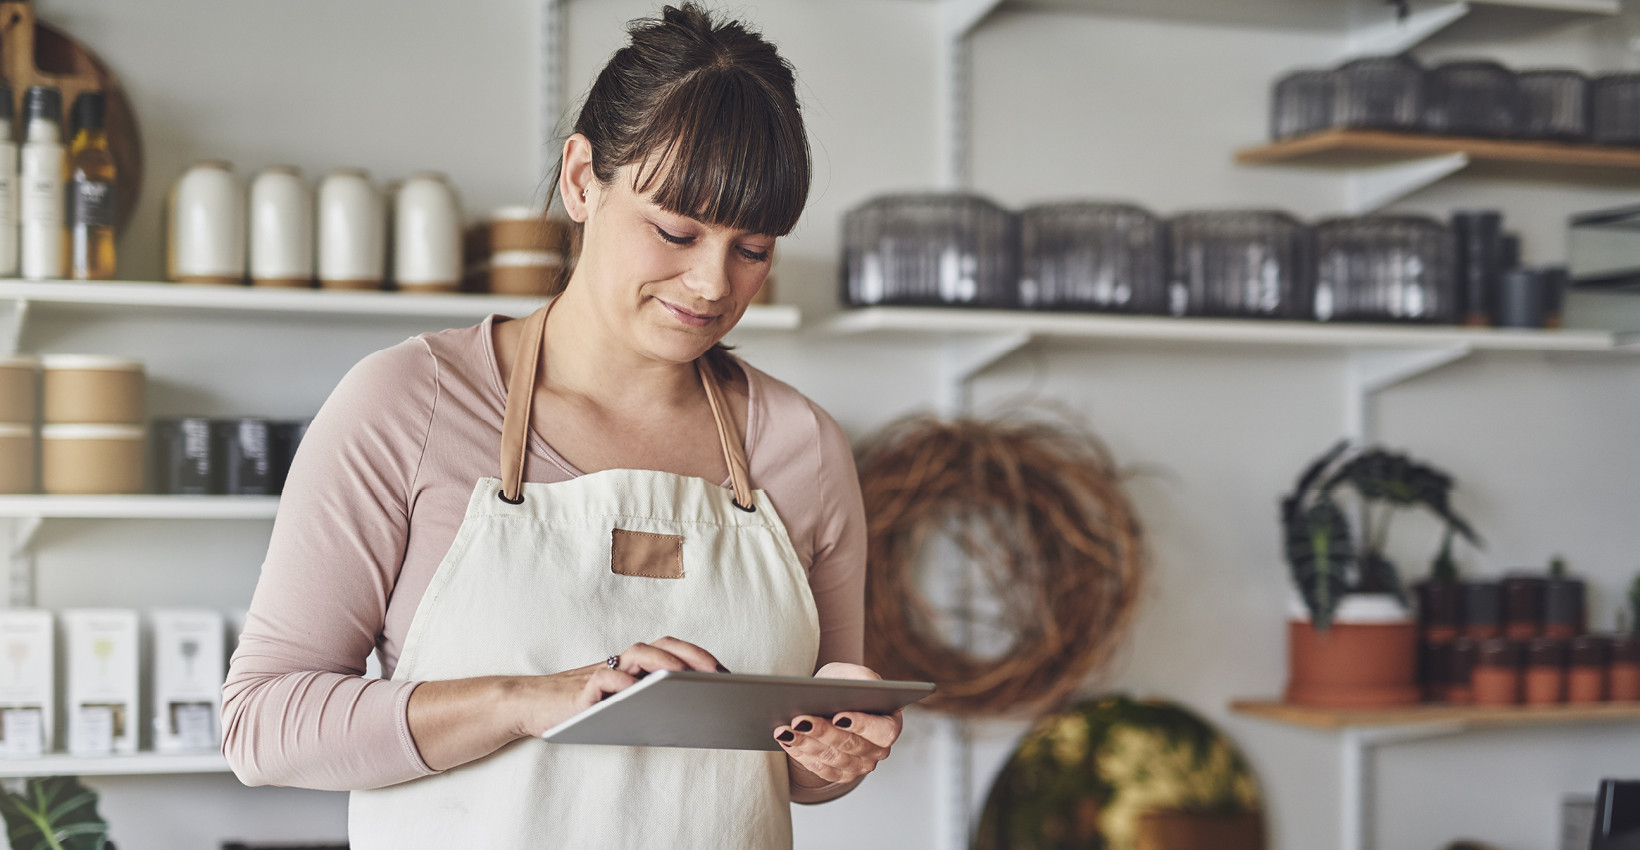 A woman using an ipad in a commercial kitchen